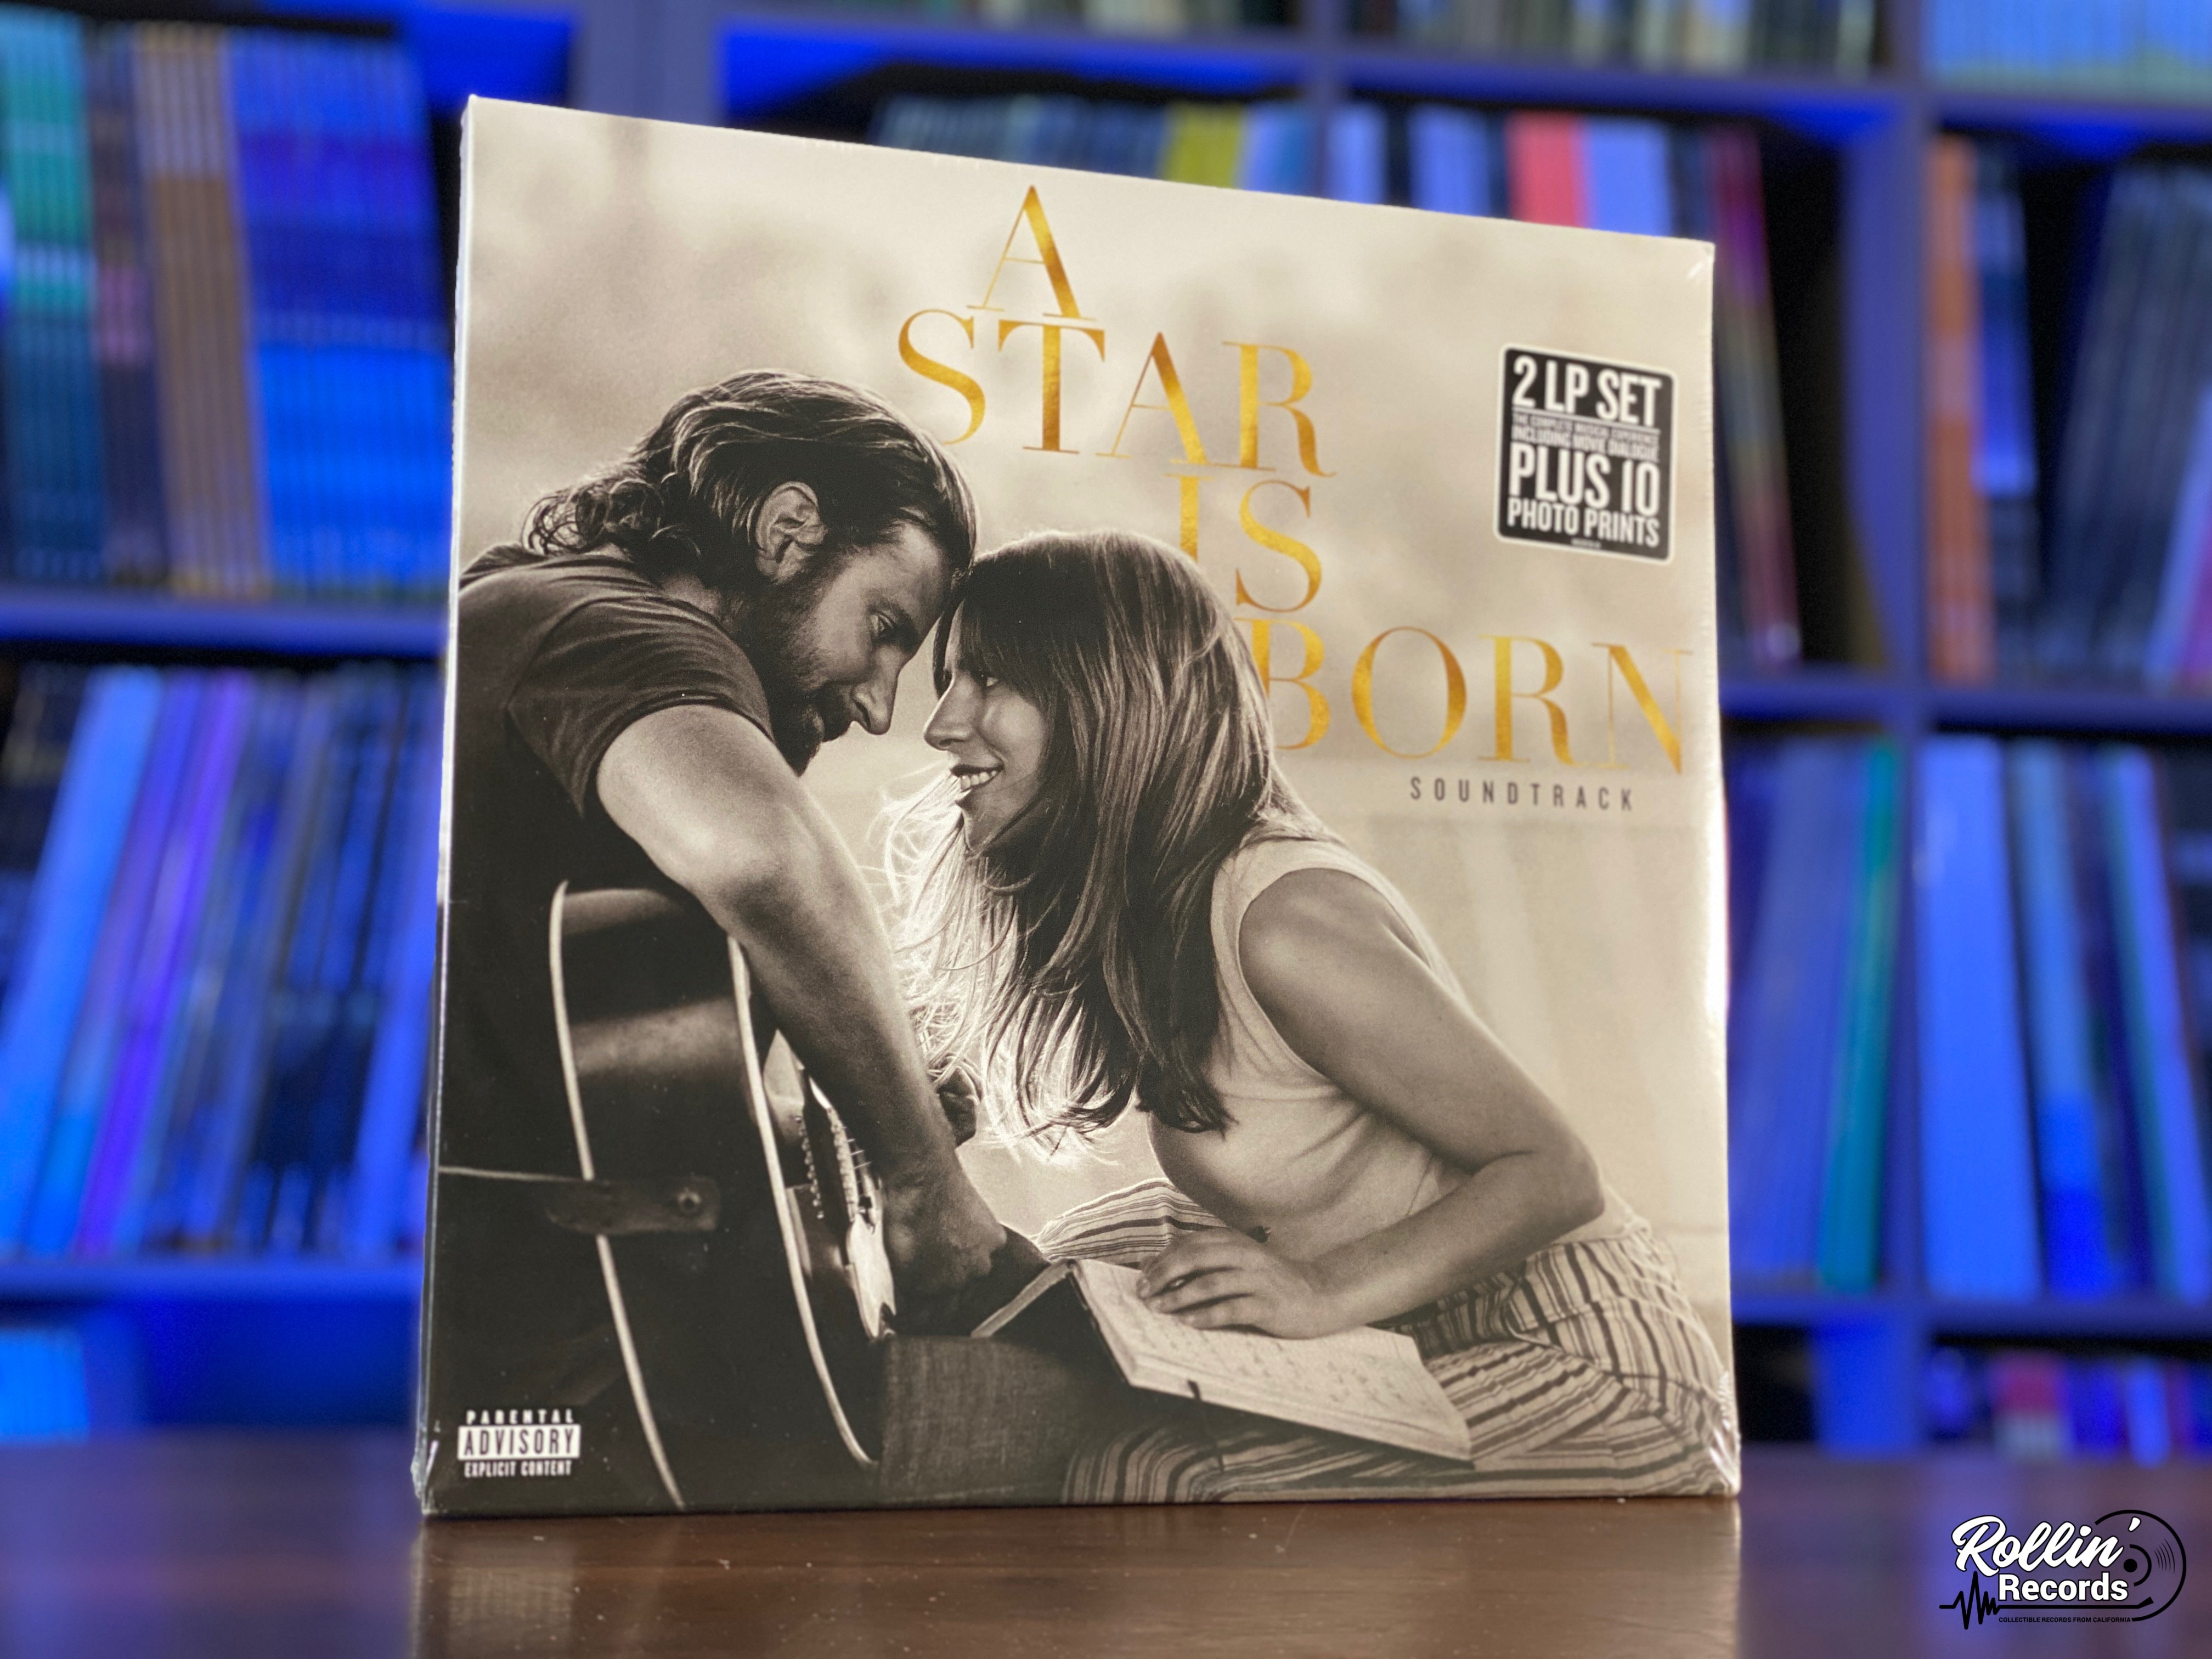 Lady Gaga - A Star Is Born (Original Motion Picture Soundtrack